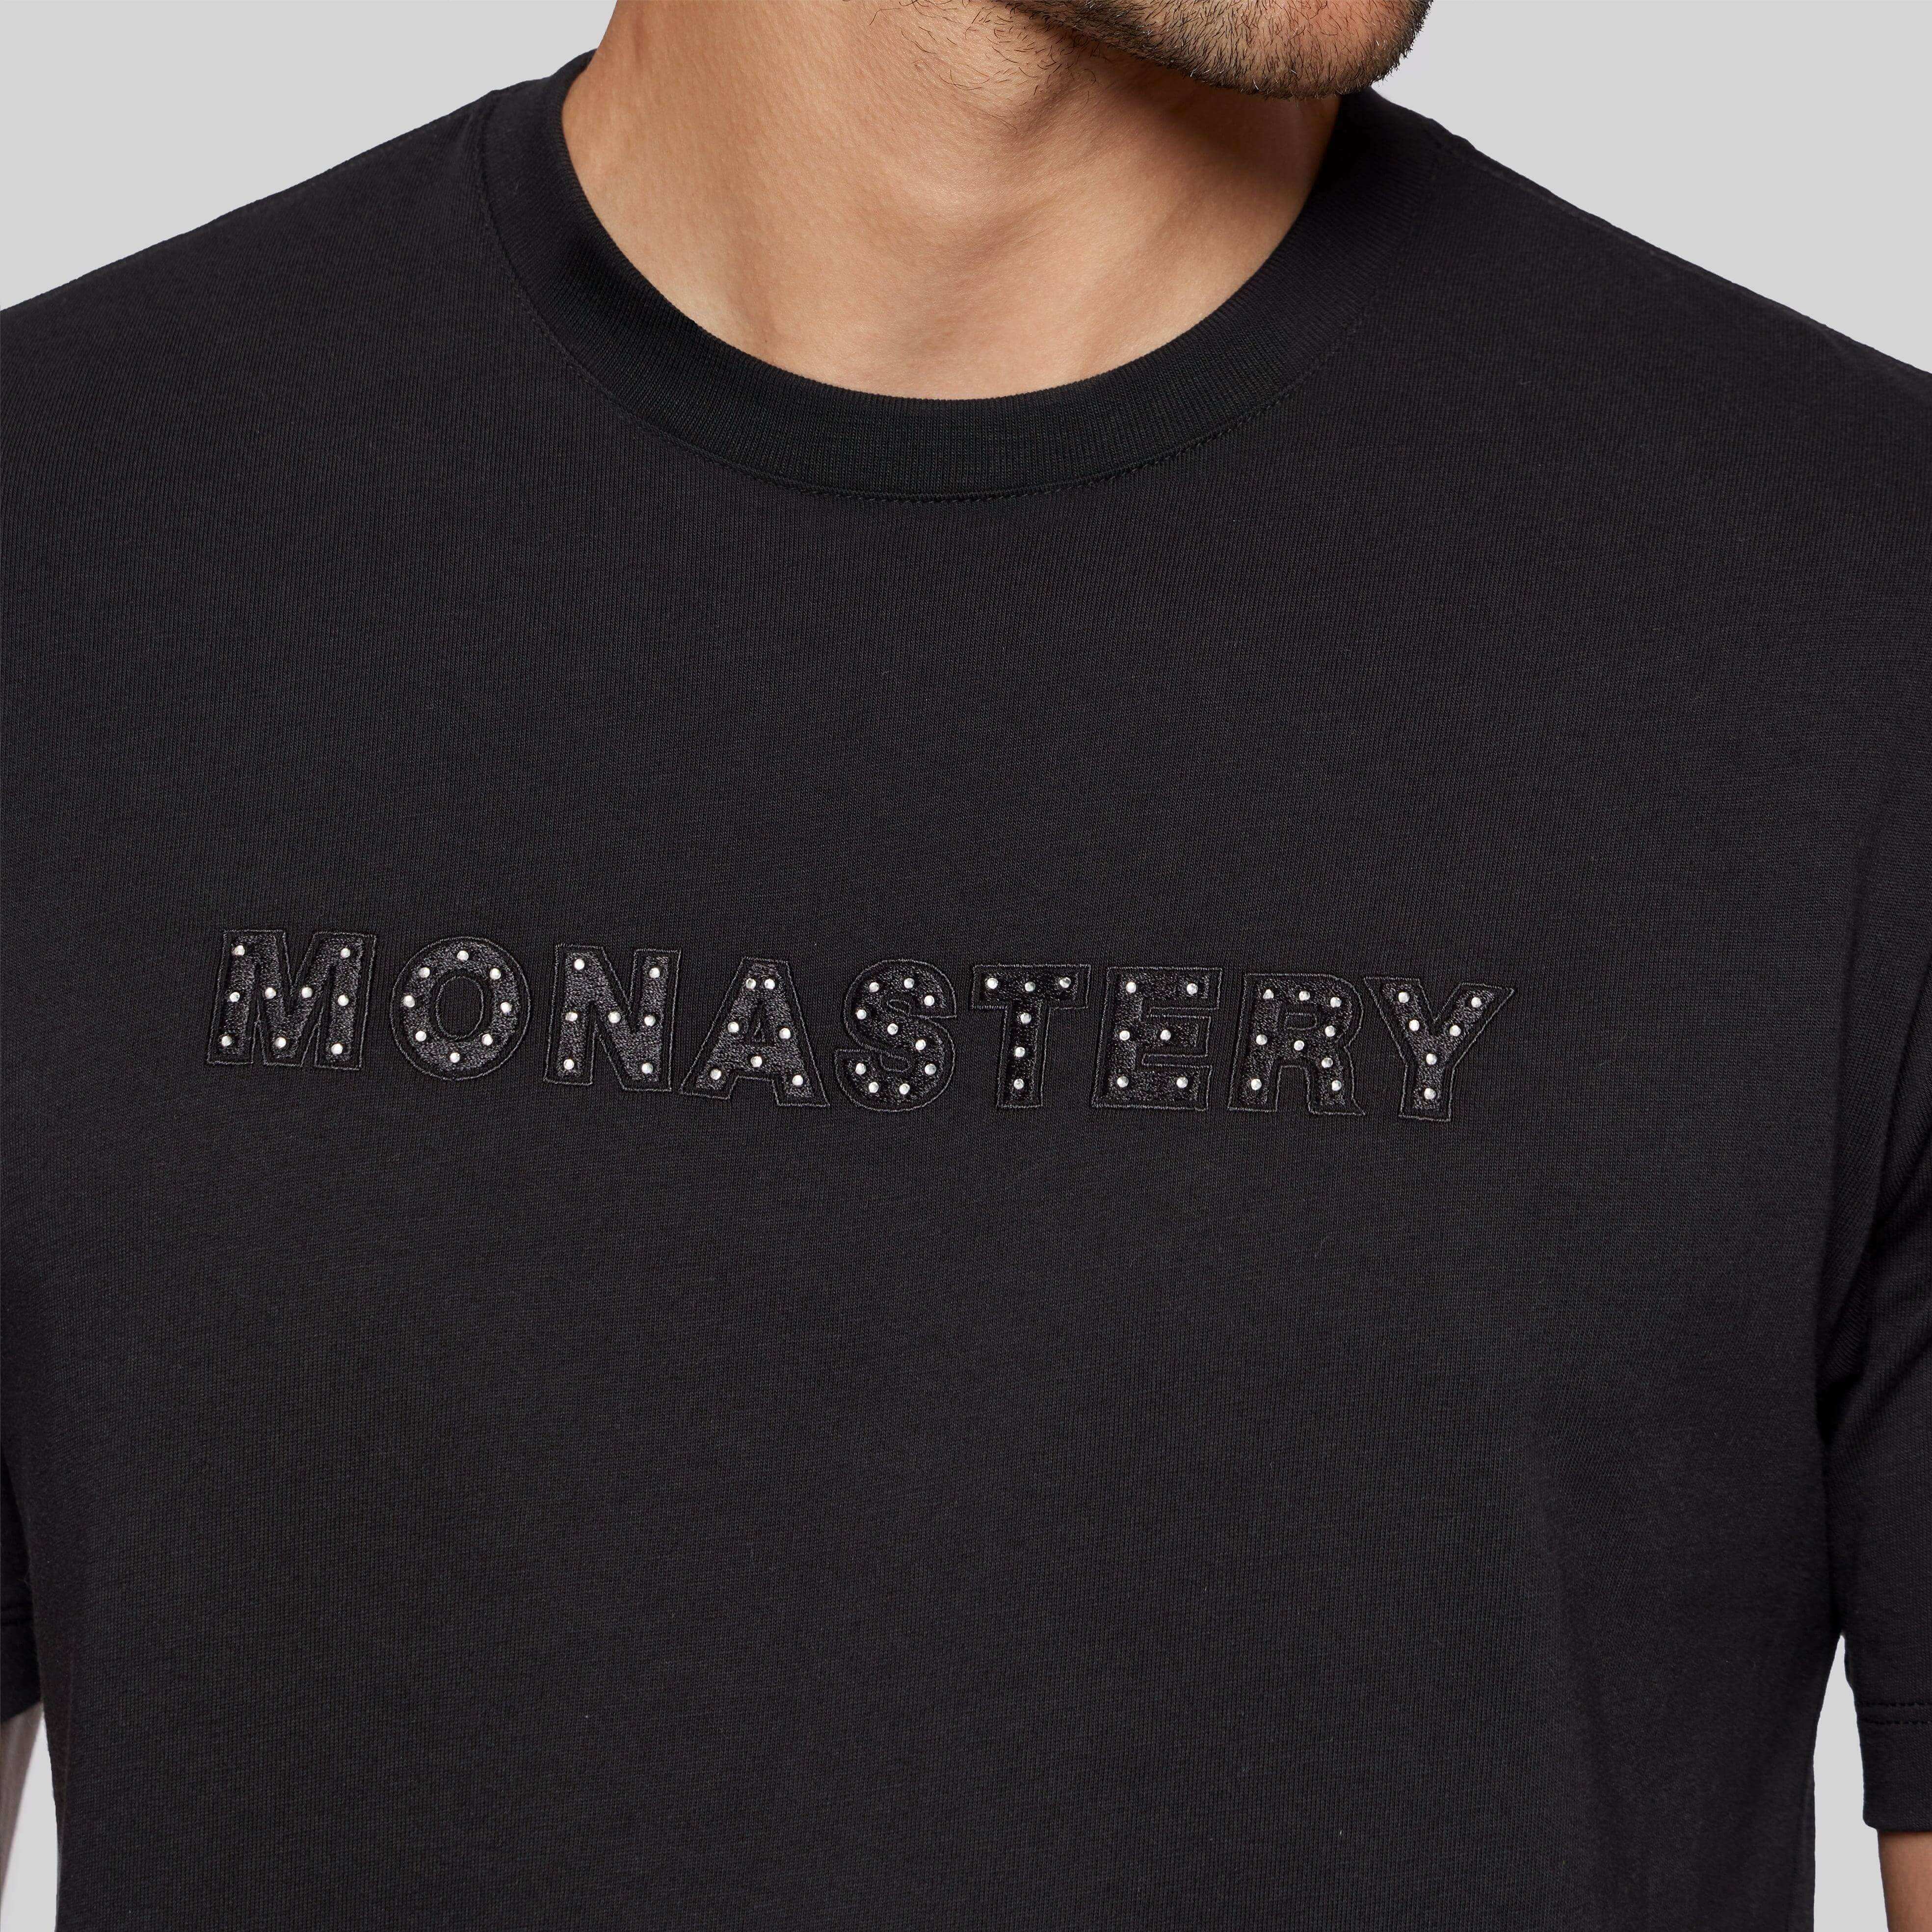 ALTAIR BLACK T-SHIRT | Monastery Couture